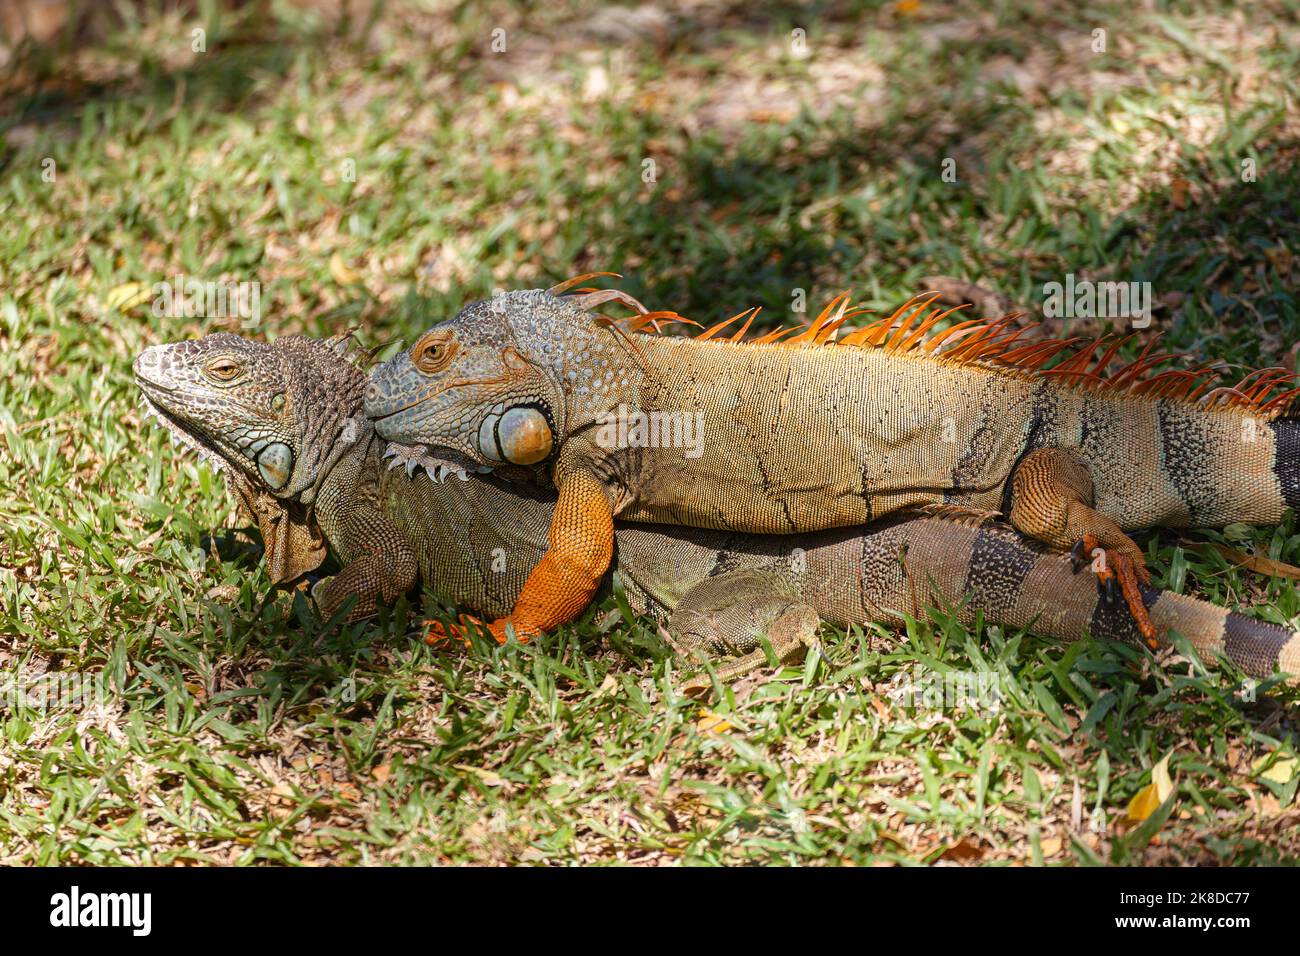 young male and female green iguana lizard in colourful skin during the breeding season in the wild nature. Animal wildlife behavior. Stock Photo